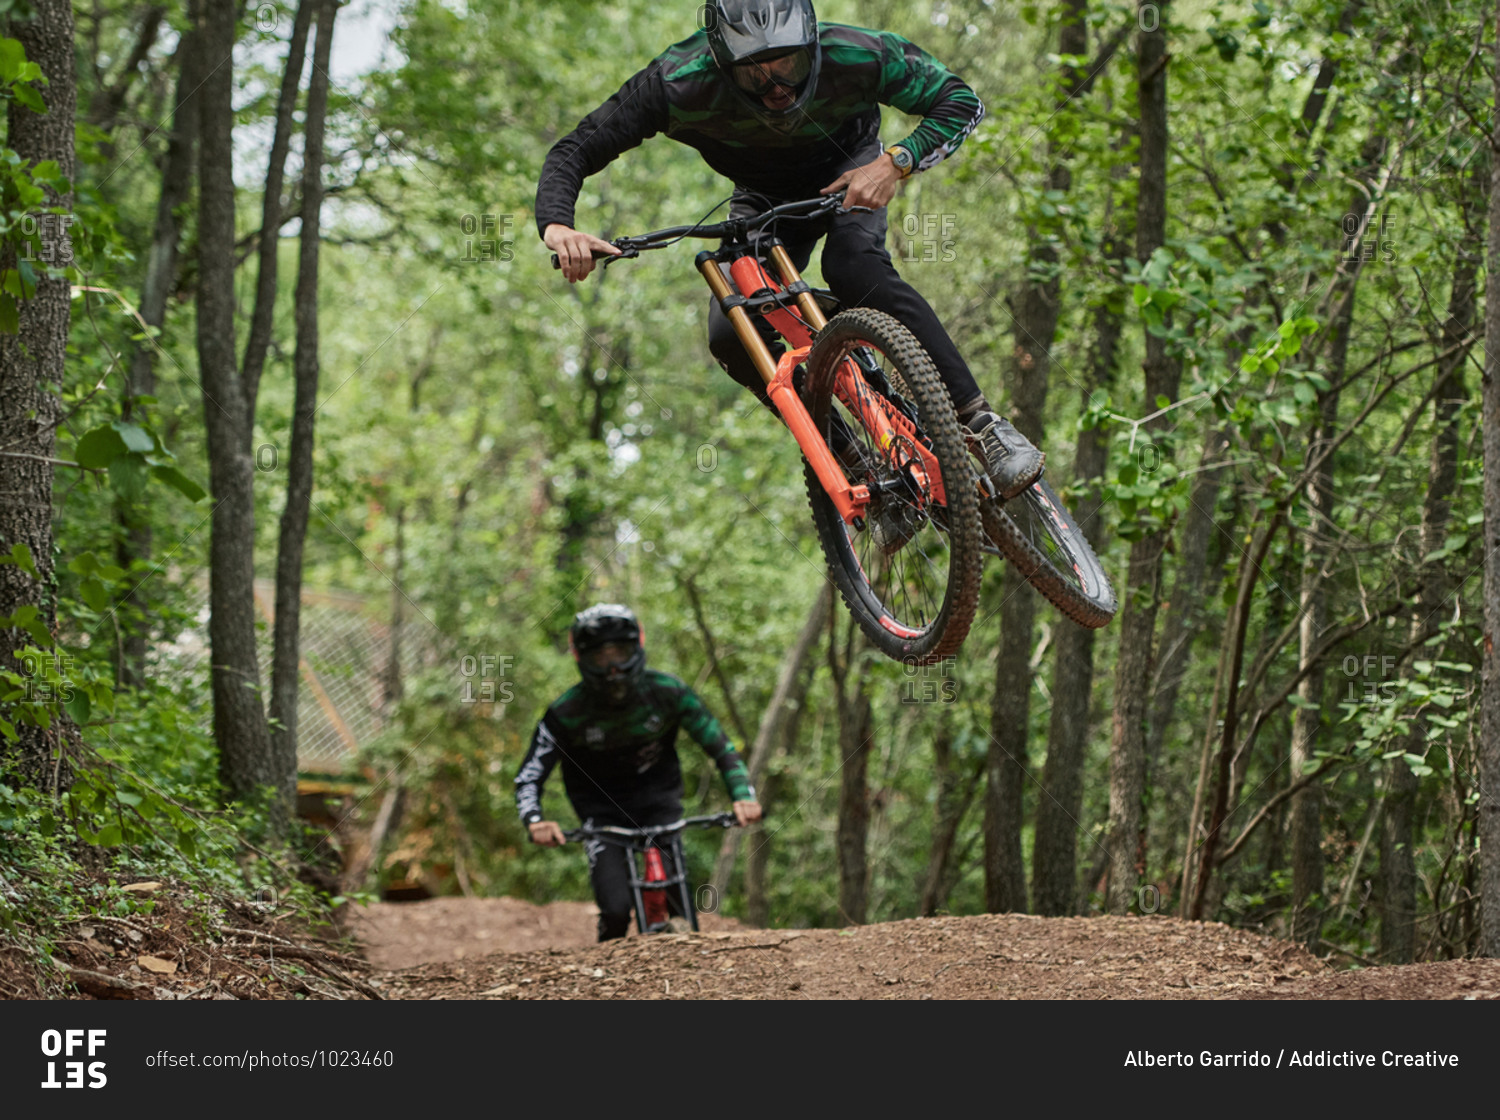 Male cyclists in protective helmets and costumes performing dangerous stunts on bikes for downhill on trail in forest